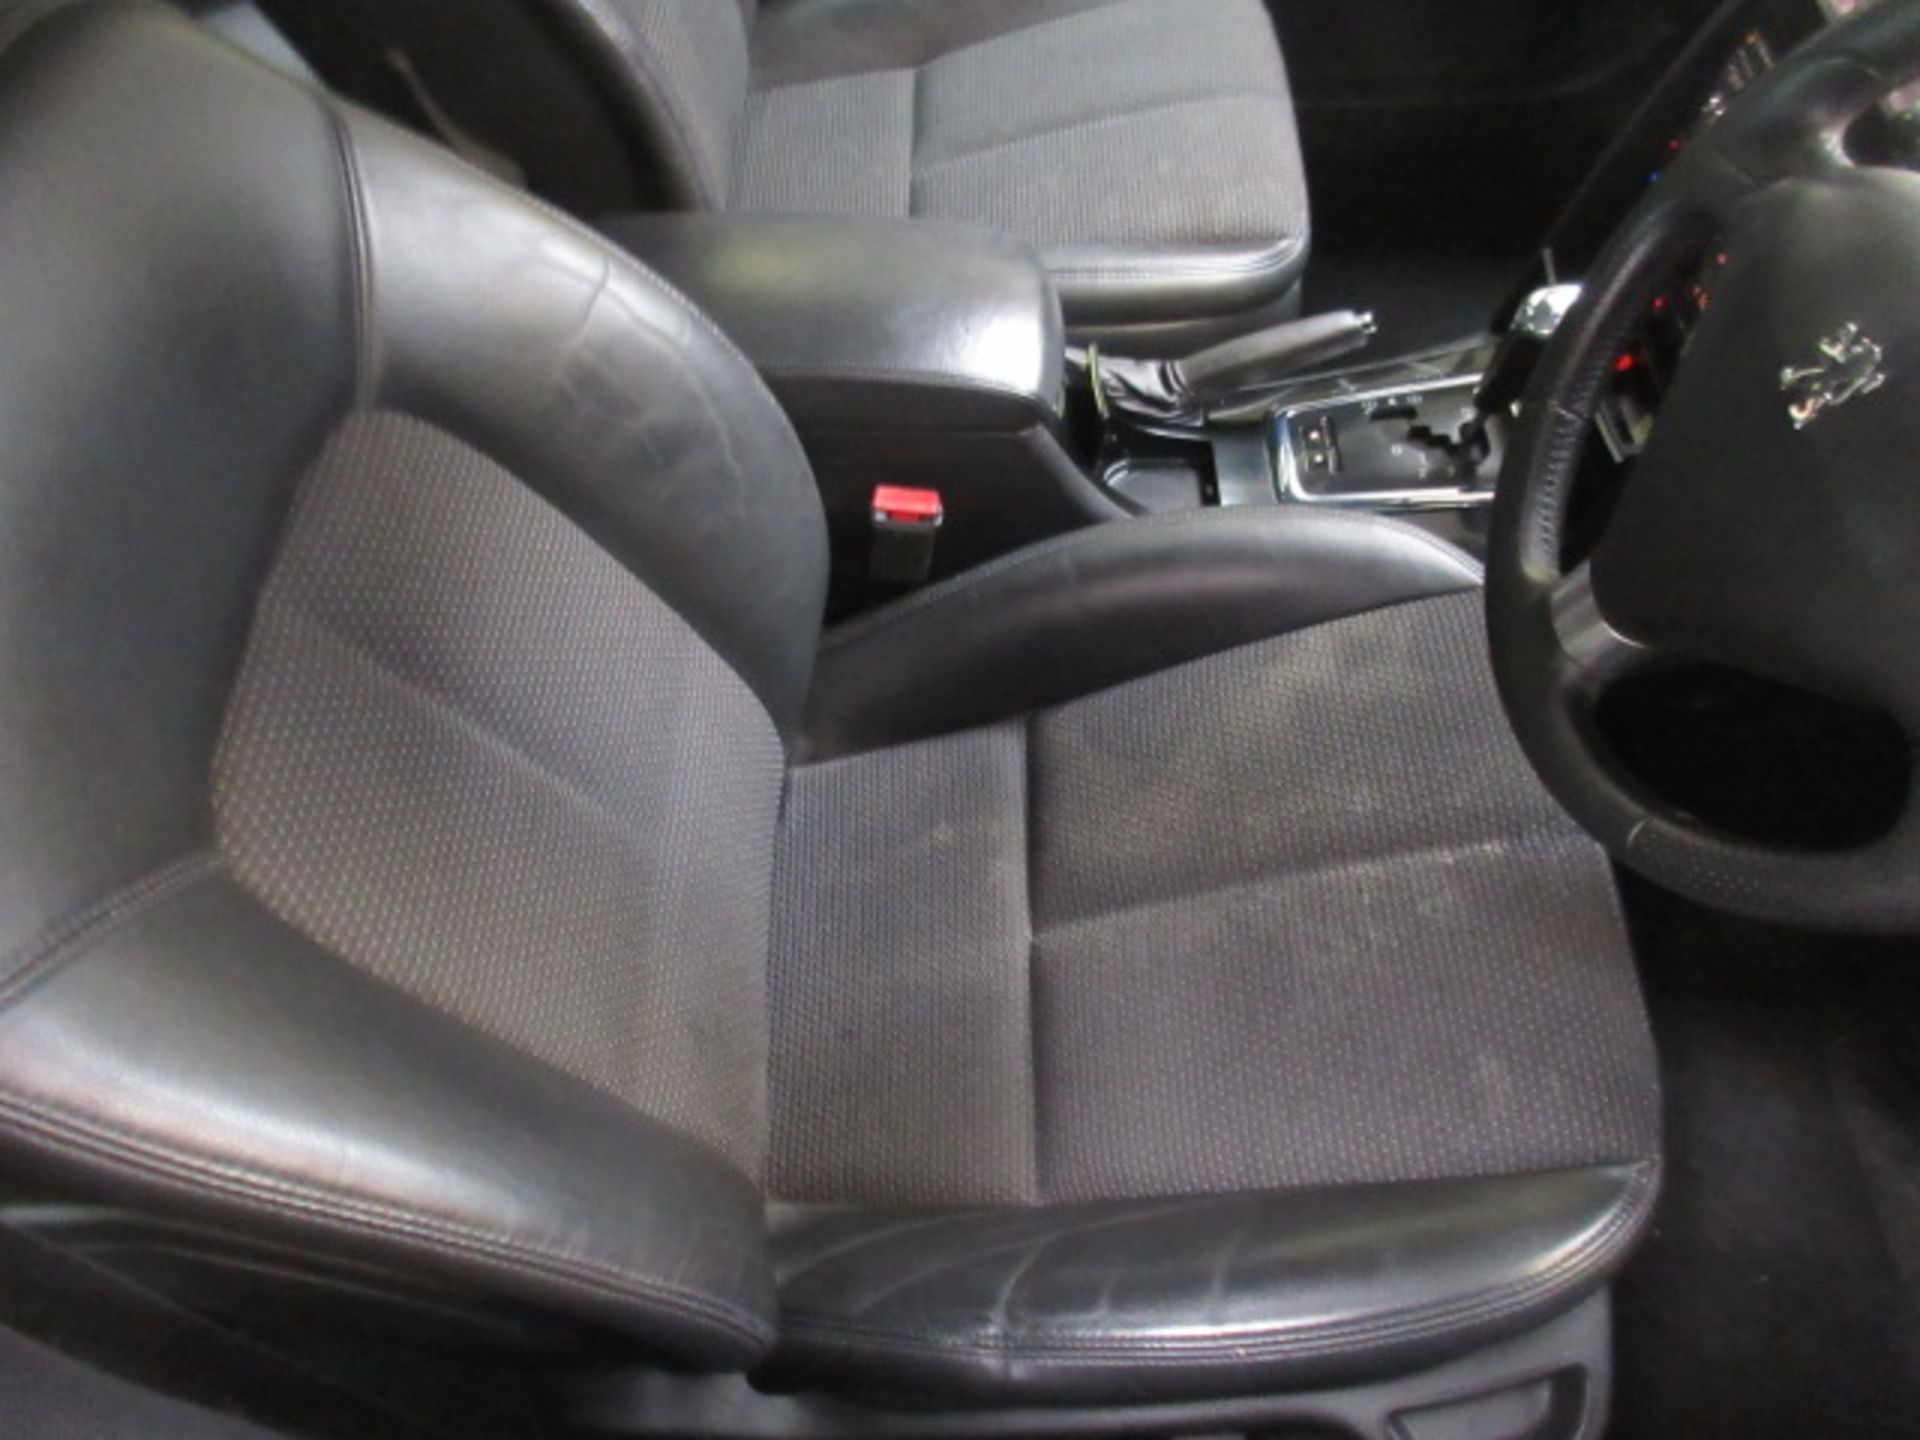 2010 Peugeot 407 Sport SW HDI 163 - Image 10 of 11